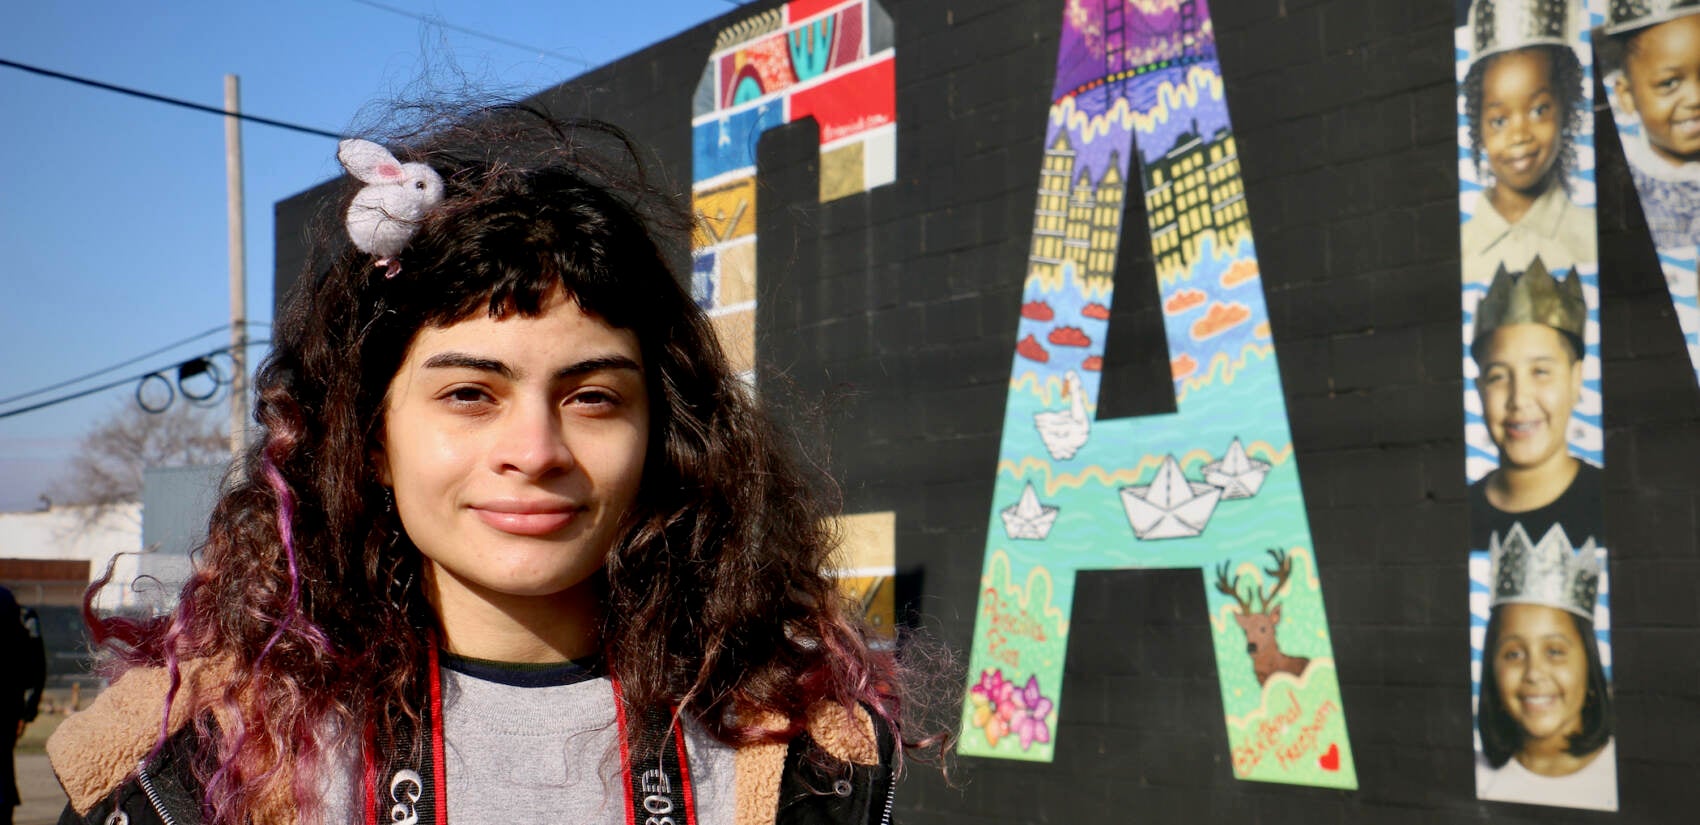 Priscilla Rios, a lifelong Camden resident, made both the A and E for the ''Camden Invincible'' mural. Her A depicts the city’s natural areas, its abandoned buildings, and the spectacular view from the Camden waterfront. (Emma Lee/WHYY)